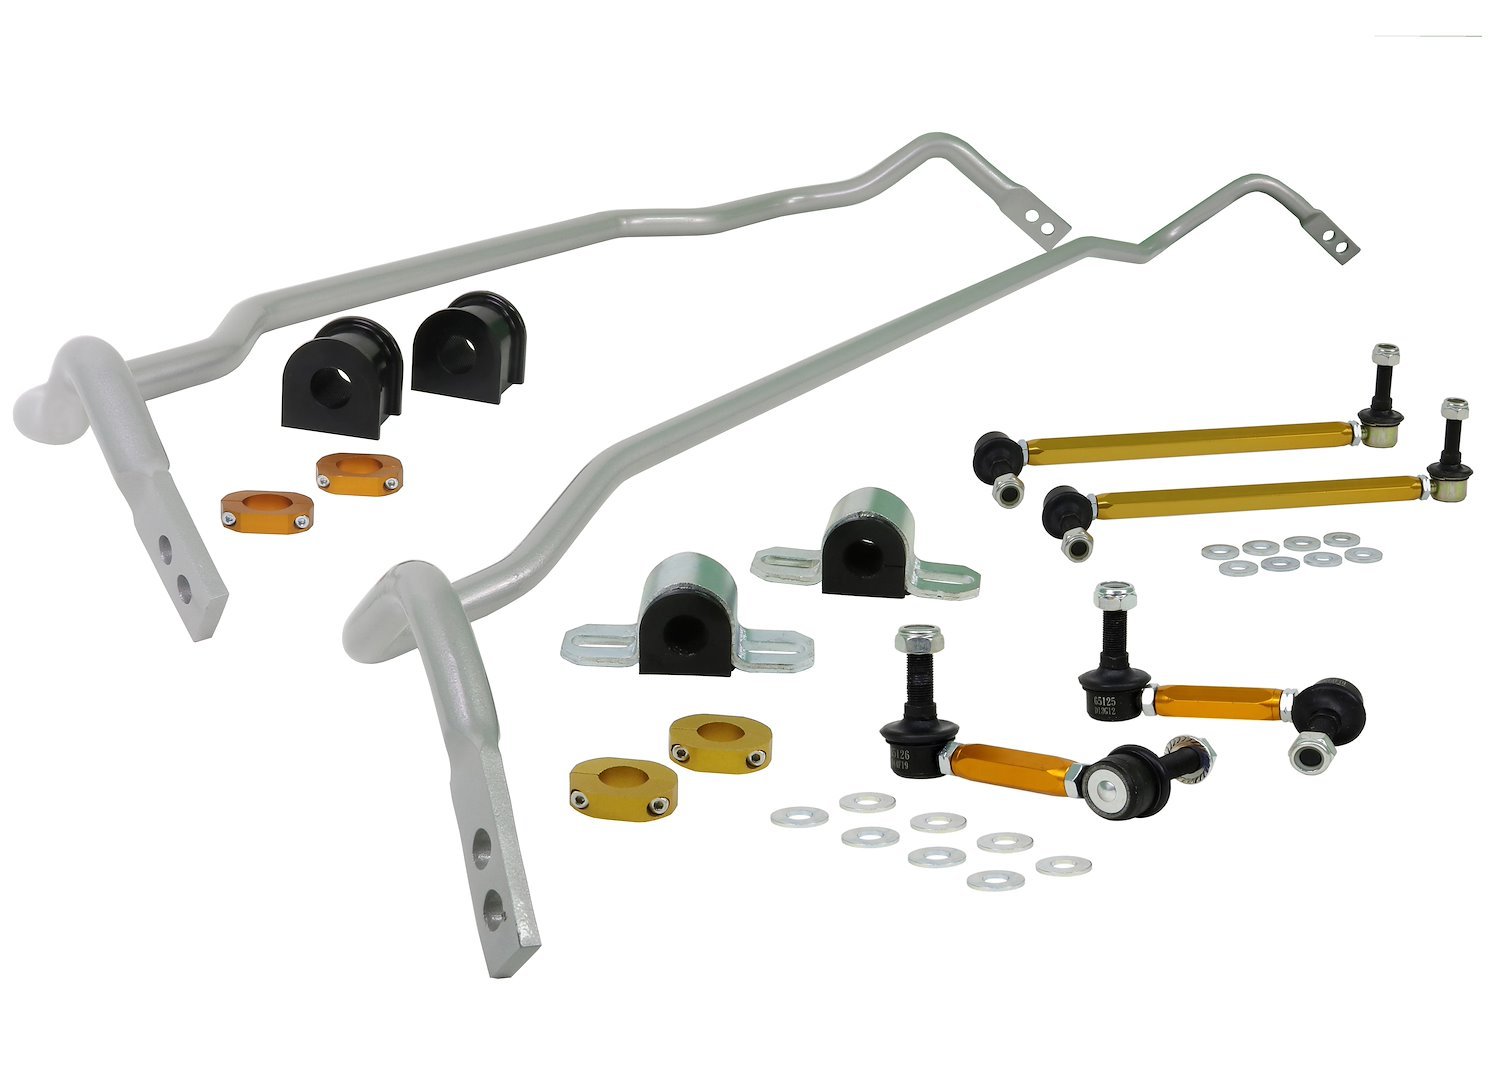 BKK001 Front and Rear Sway Bar Kit w/End Links for 2018-2019 Kia Stinger (Incl. GT, GT1, GT2, Premium)